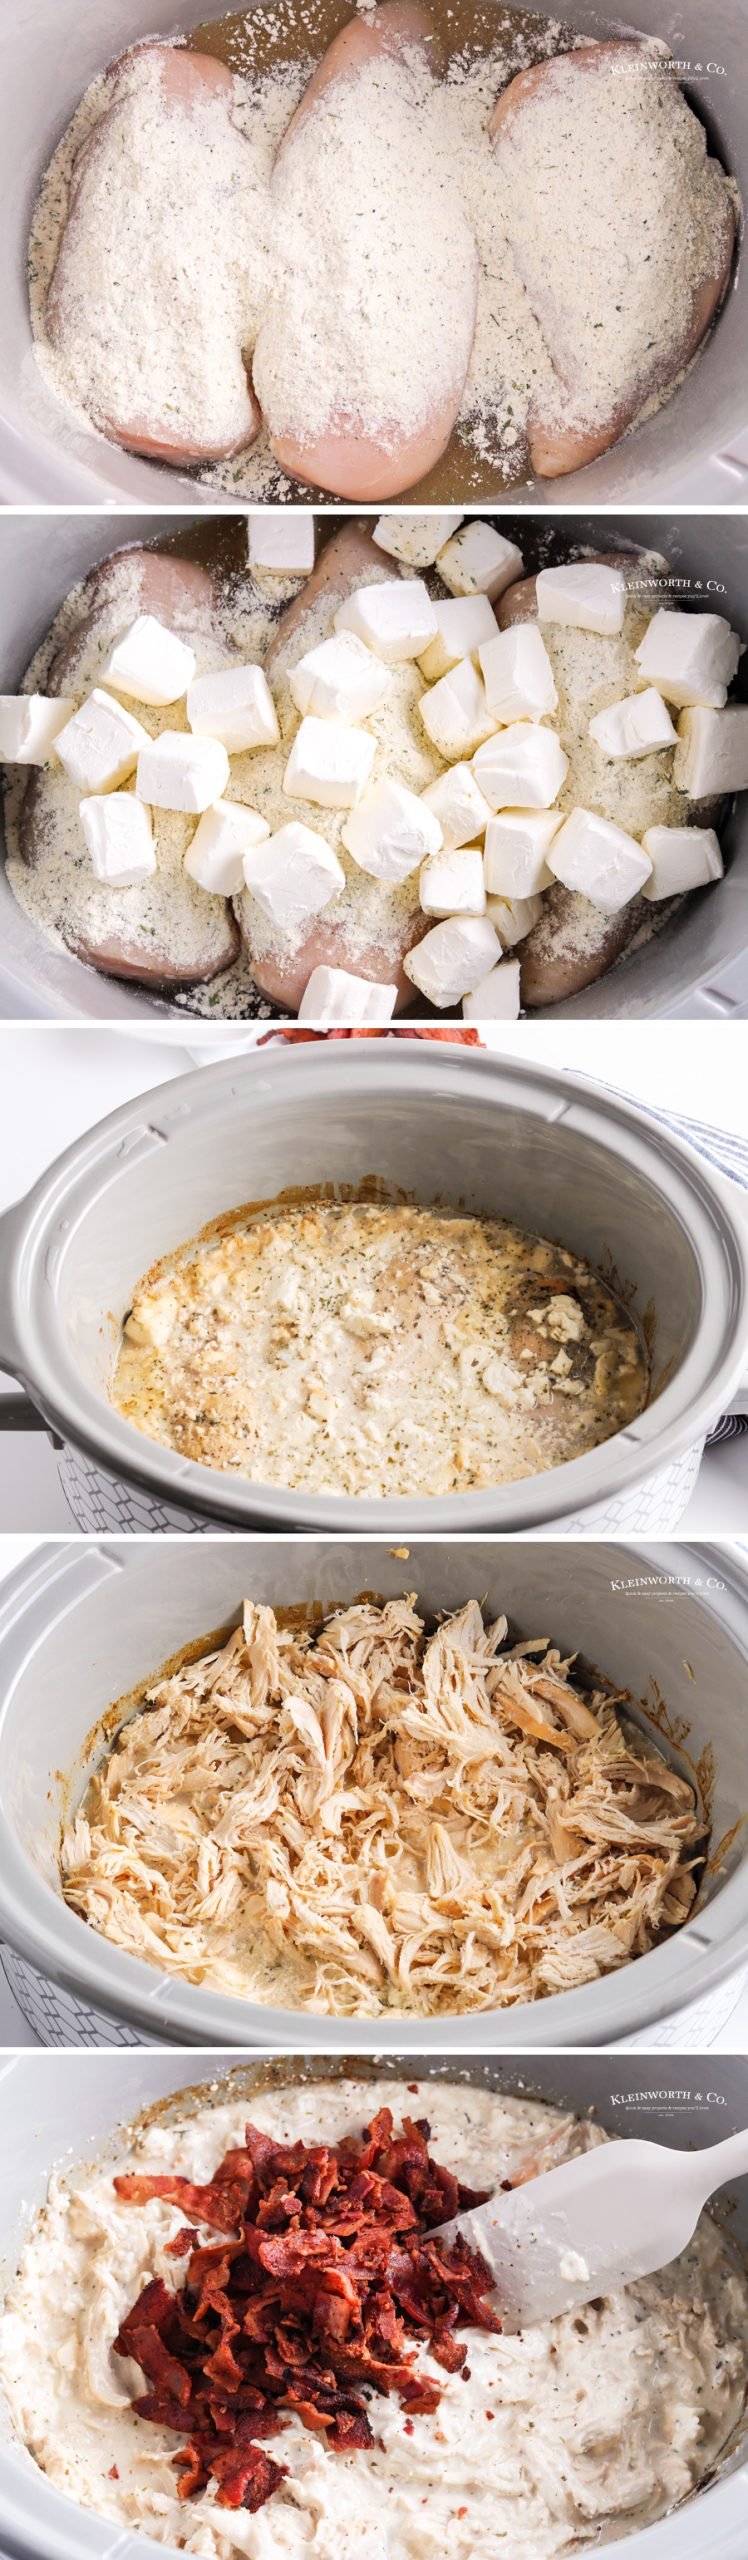 How to make Slow Cooker Crack Chicken